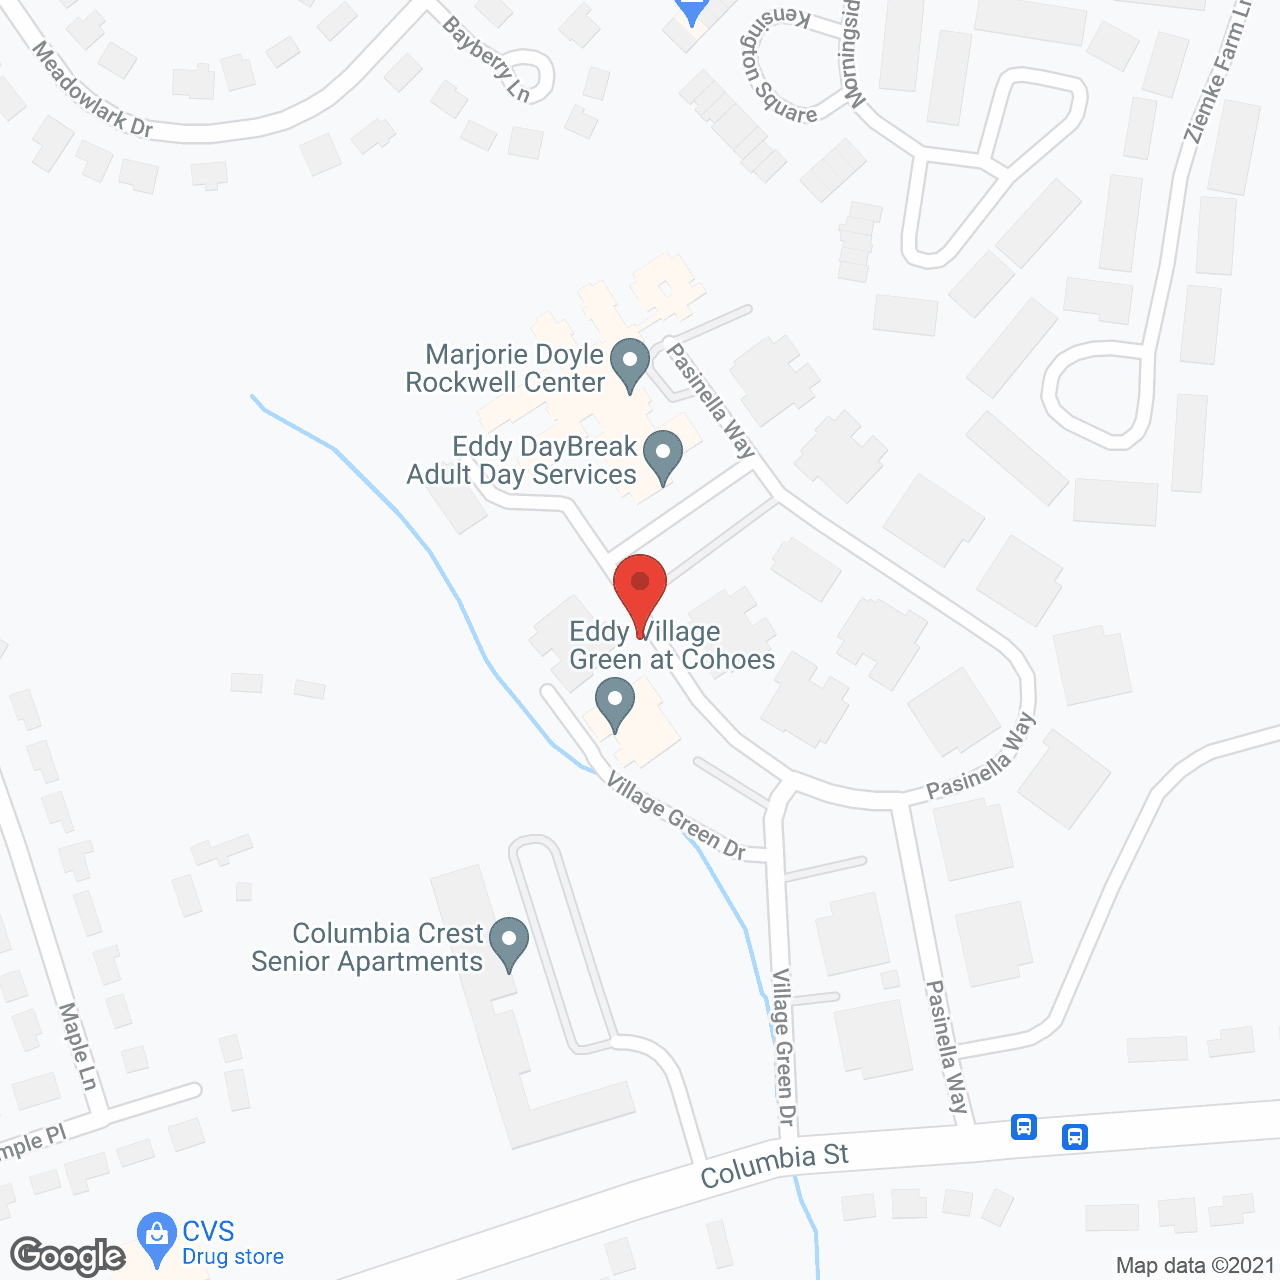 Eddy Memory Care at Marjorie Doyle Rockwell Center in google map